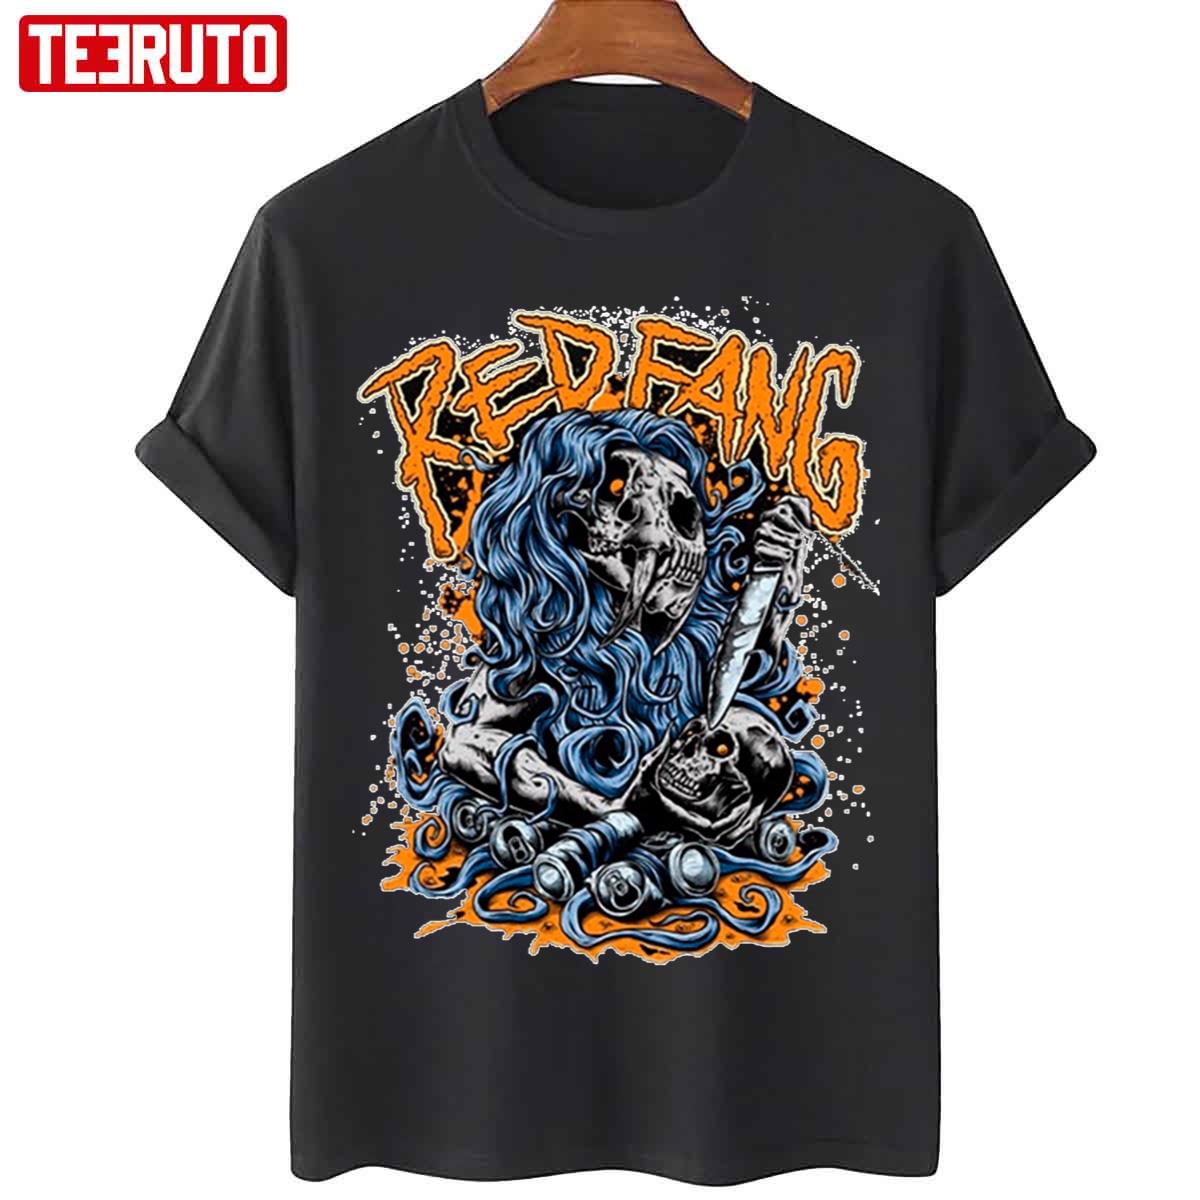 Animated Album Cover Red Fang Unisex T-Shirt - Teeruto